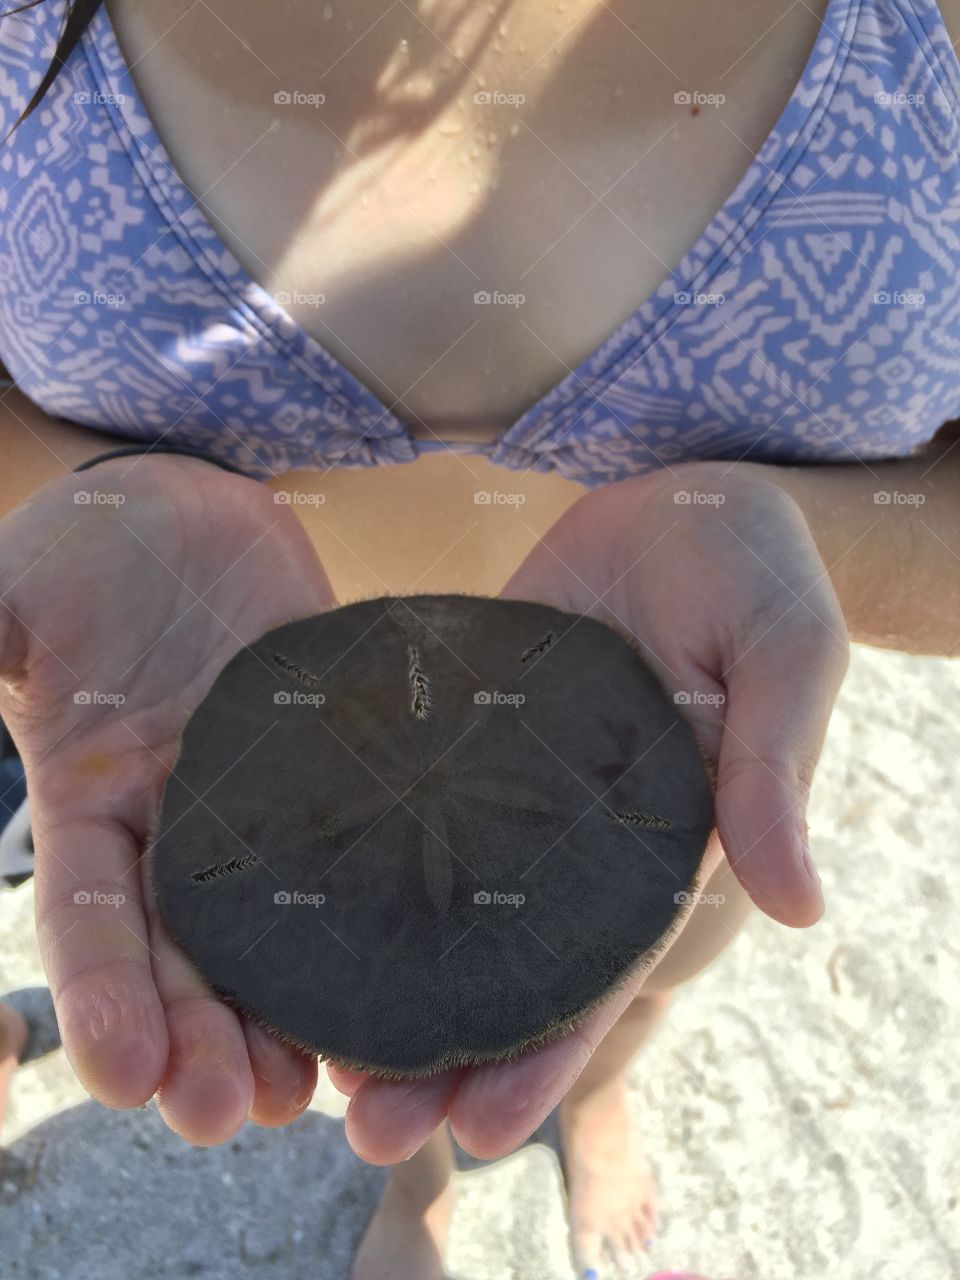 Look what I found
Sand dollar
It's alive
